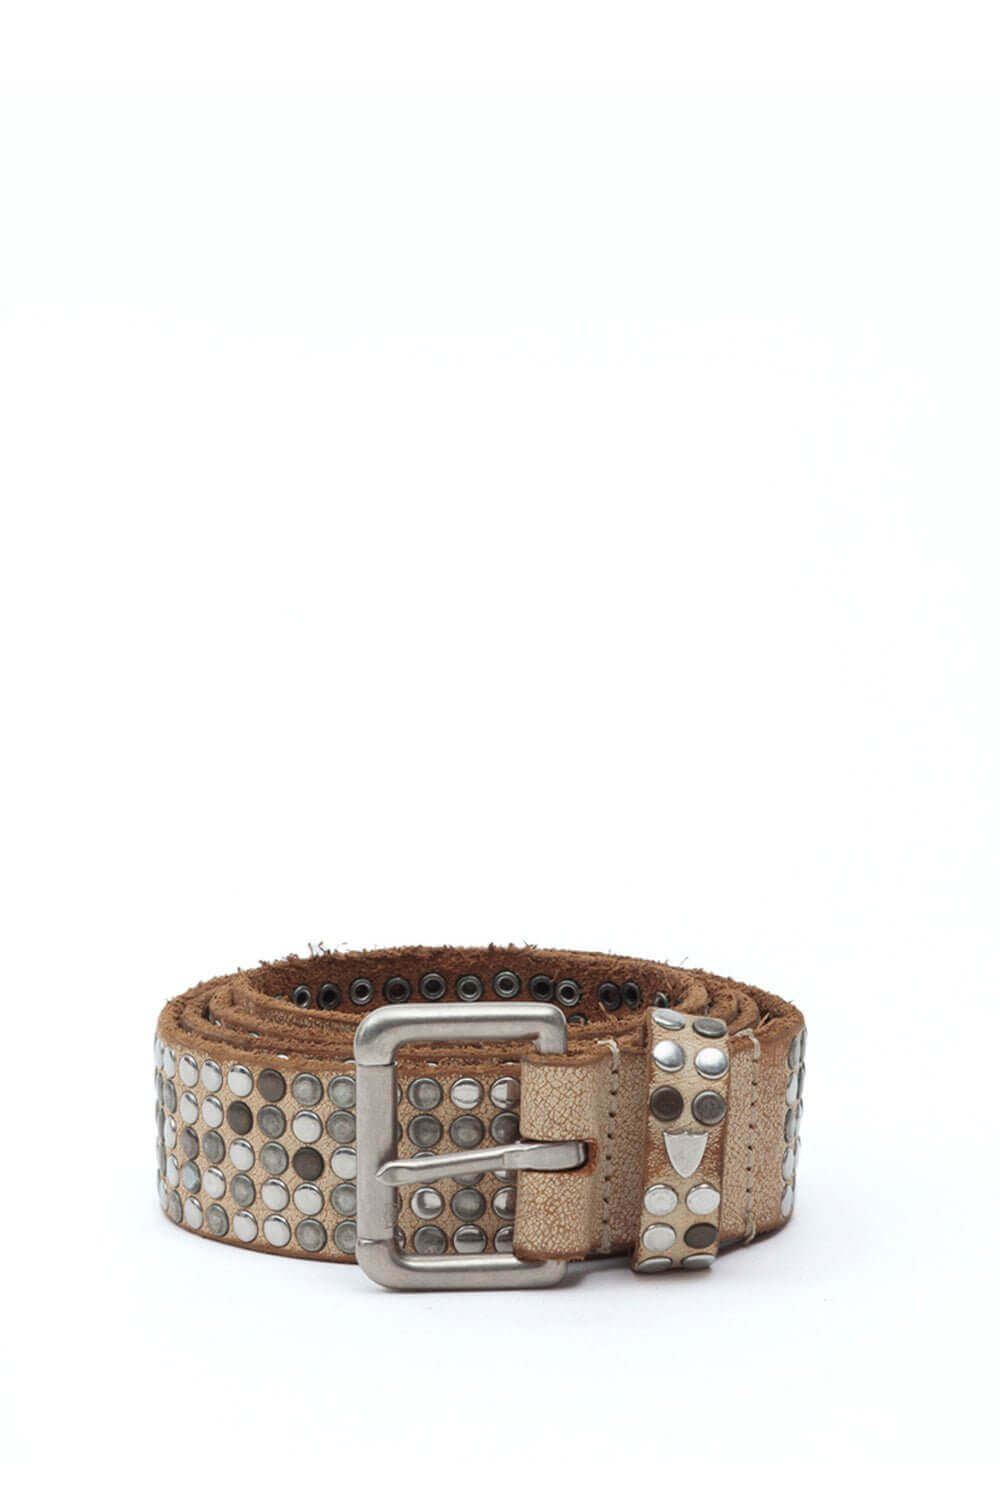 5.000 STUDS BELT Natural leather belt with studs, brass buckle, studded zamac belt loop with HTC logo rivet. Height: 3.5 cm. Made in Italy. HTC LOS ANGELES